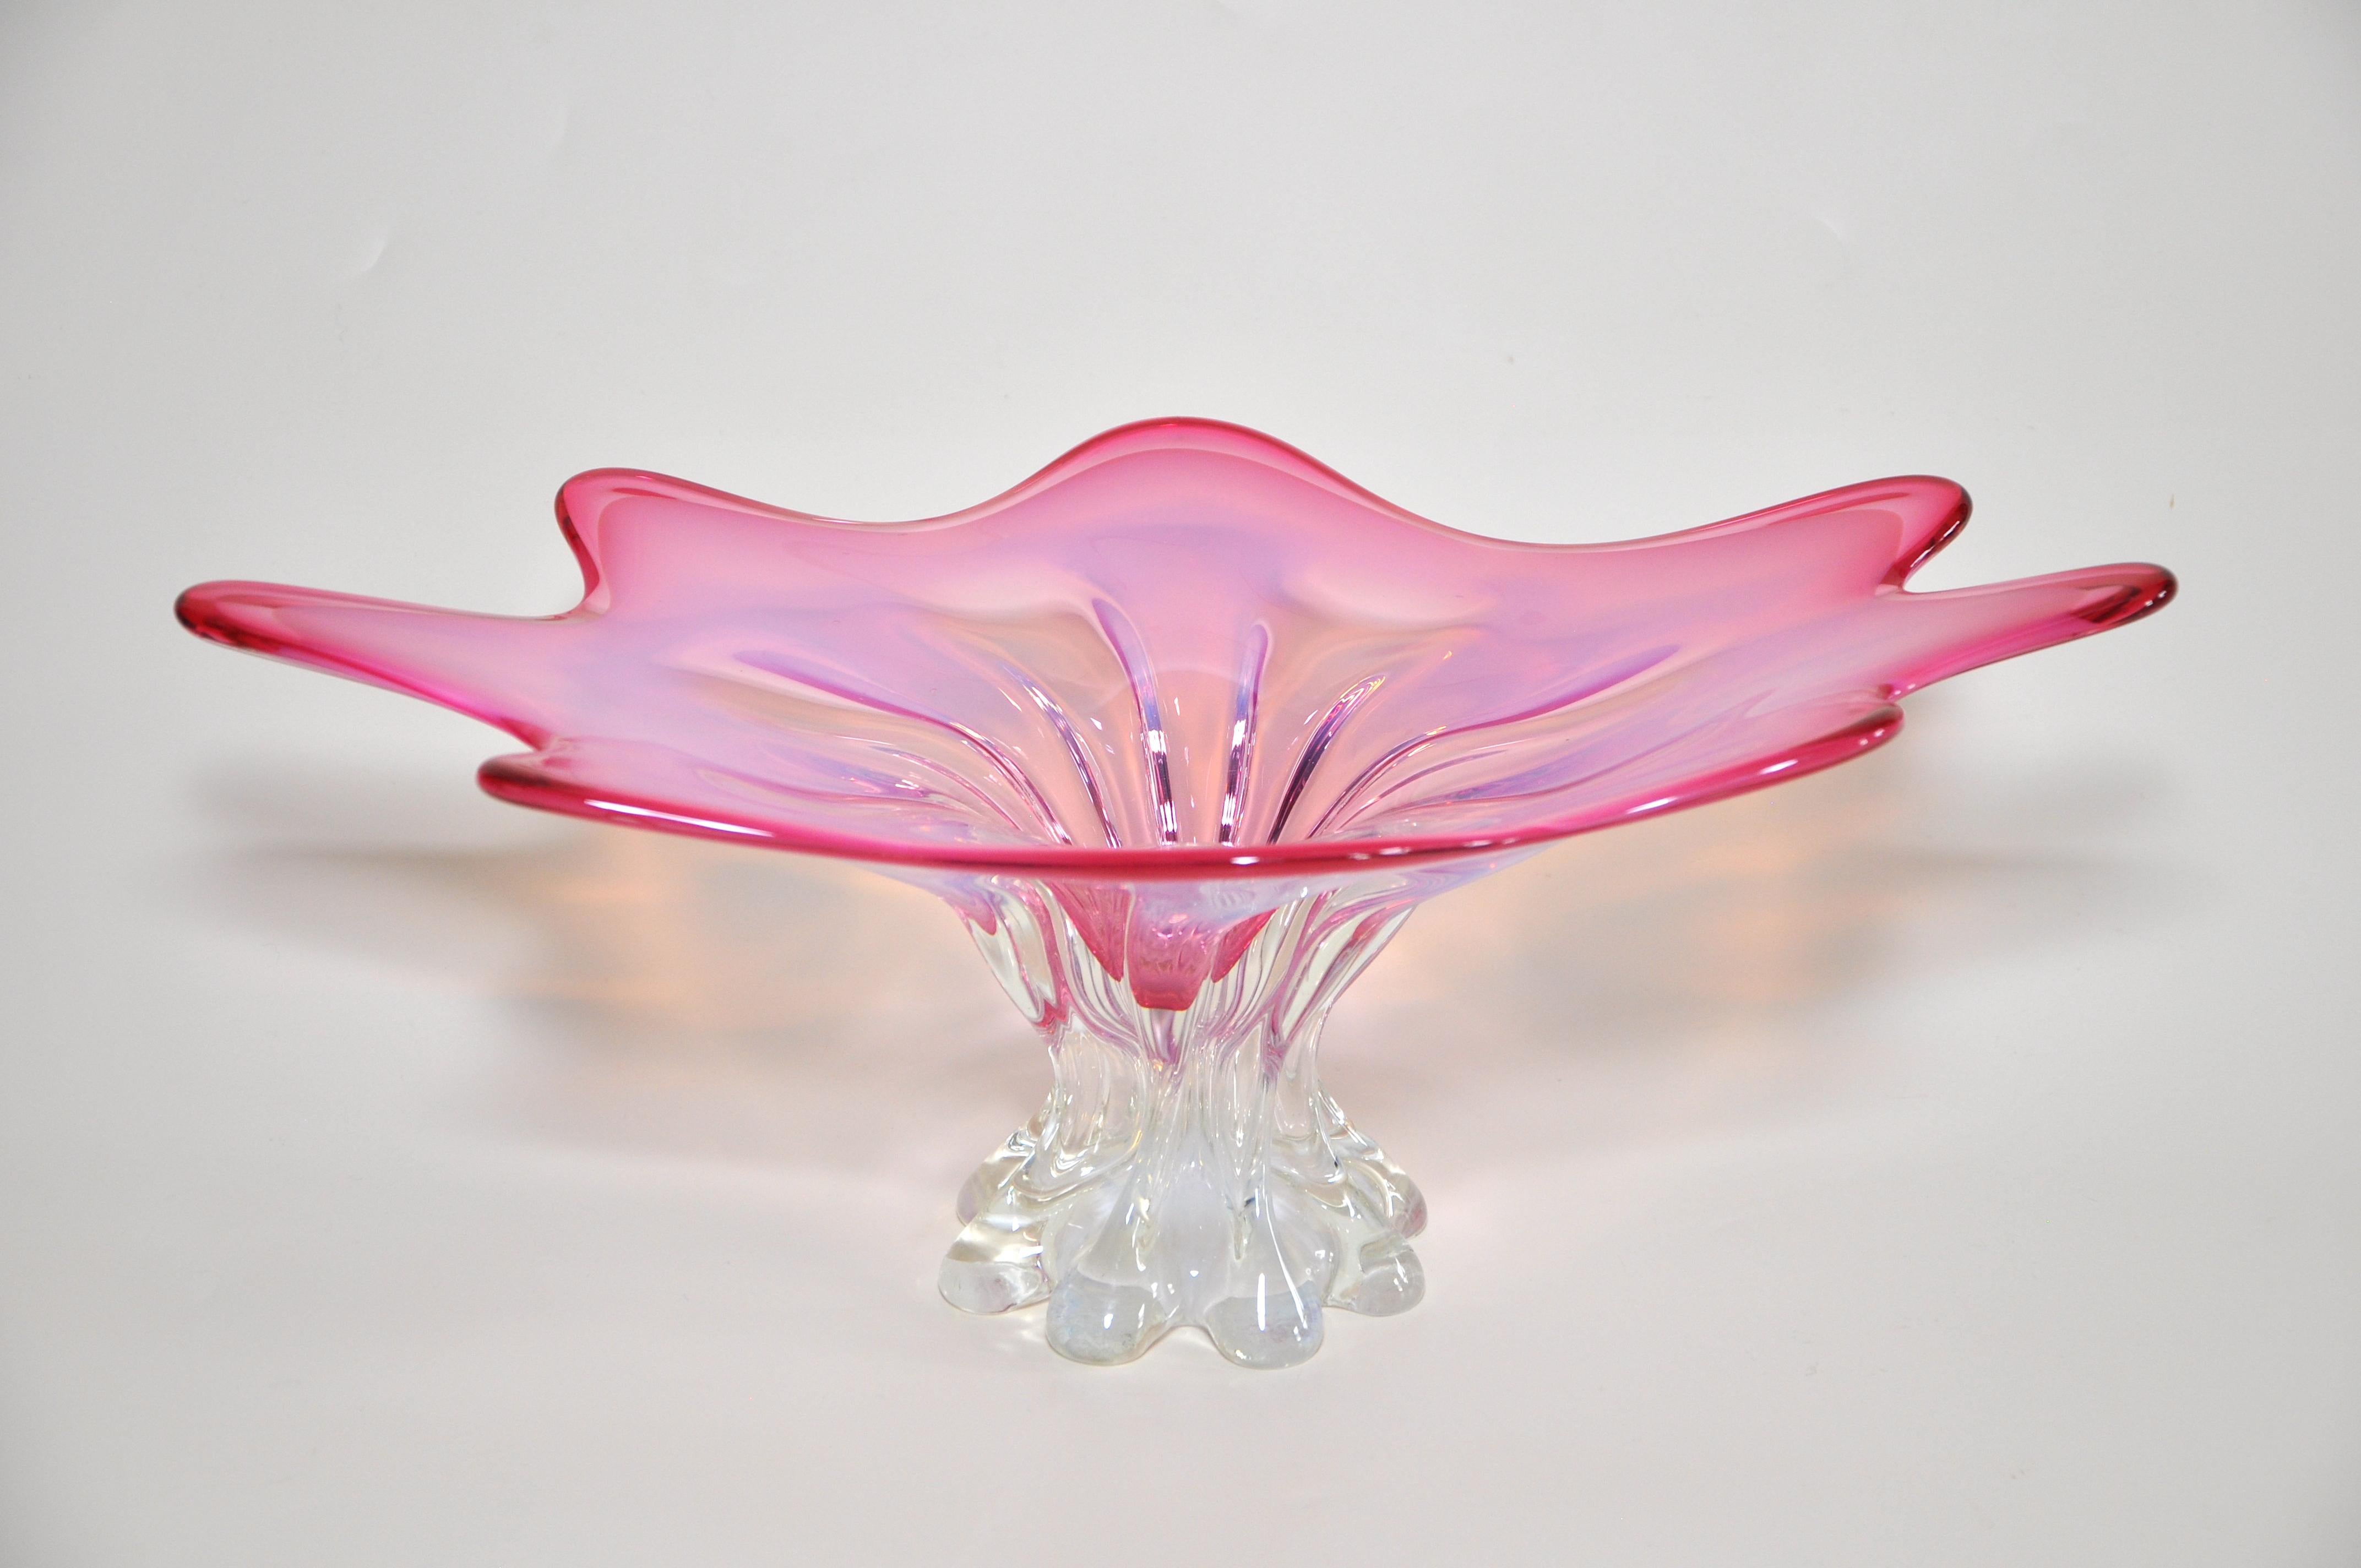 Title:
Large Stunning Vintage Pink White Art Glass Bowl Italian 

Description:
A fabulous, large vintage piece of art glass in a flamboyant, quirky shape that looks like it could have been made today. This piece is wonderful as it would look